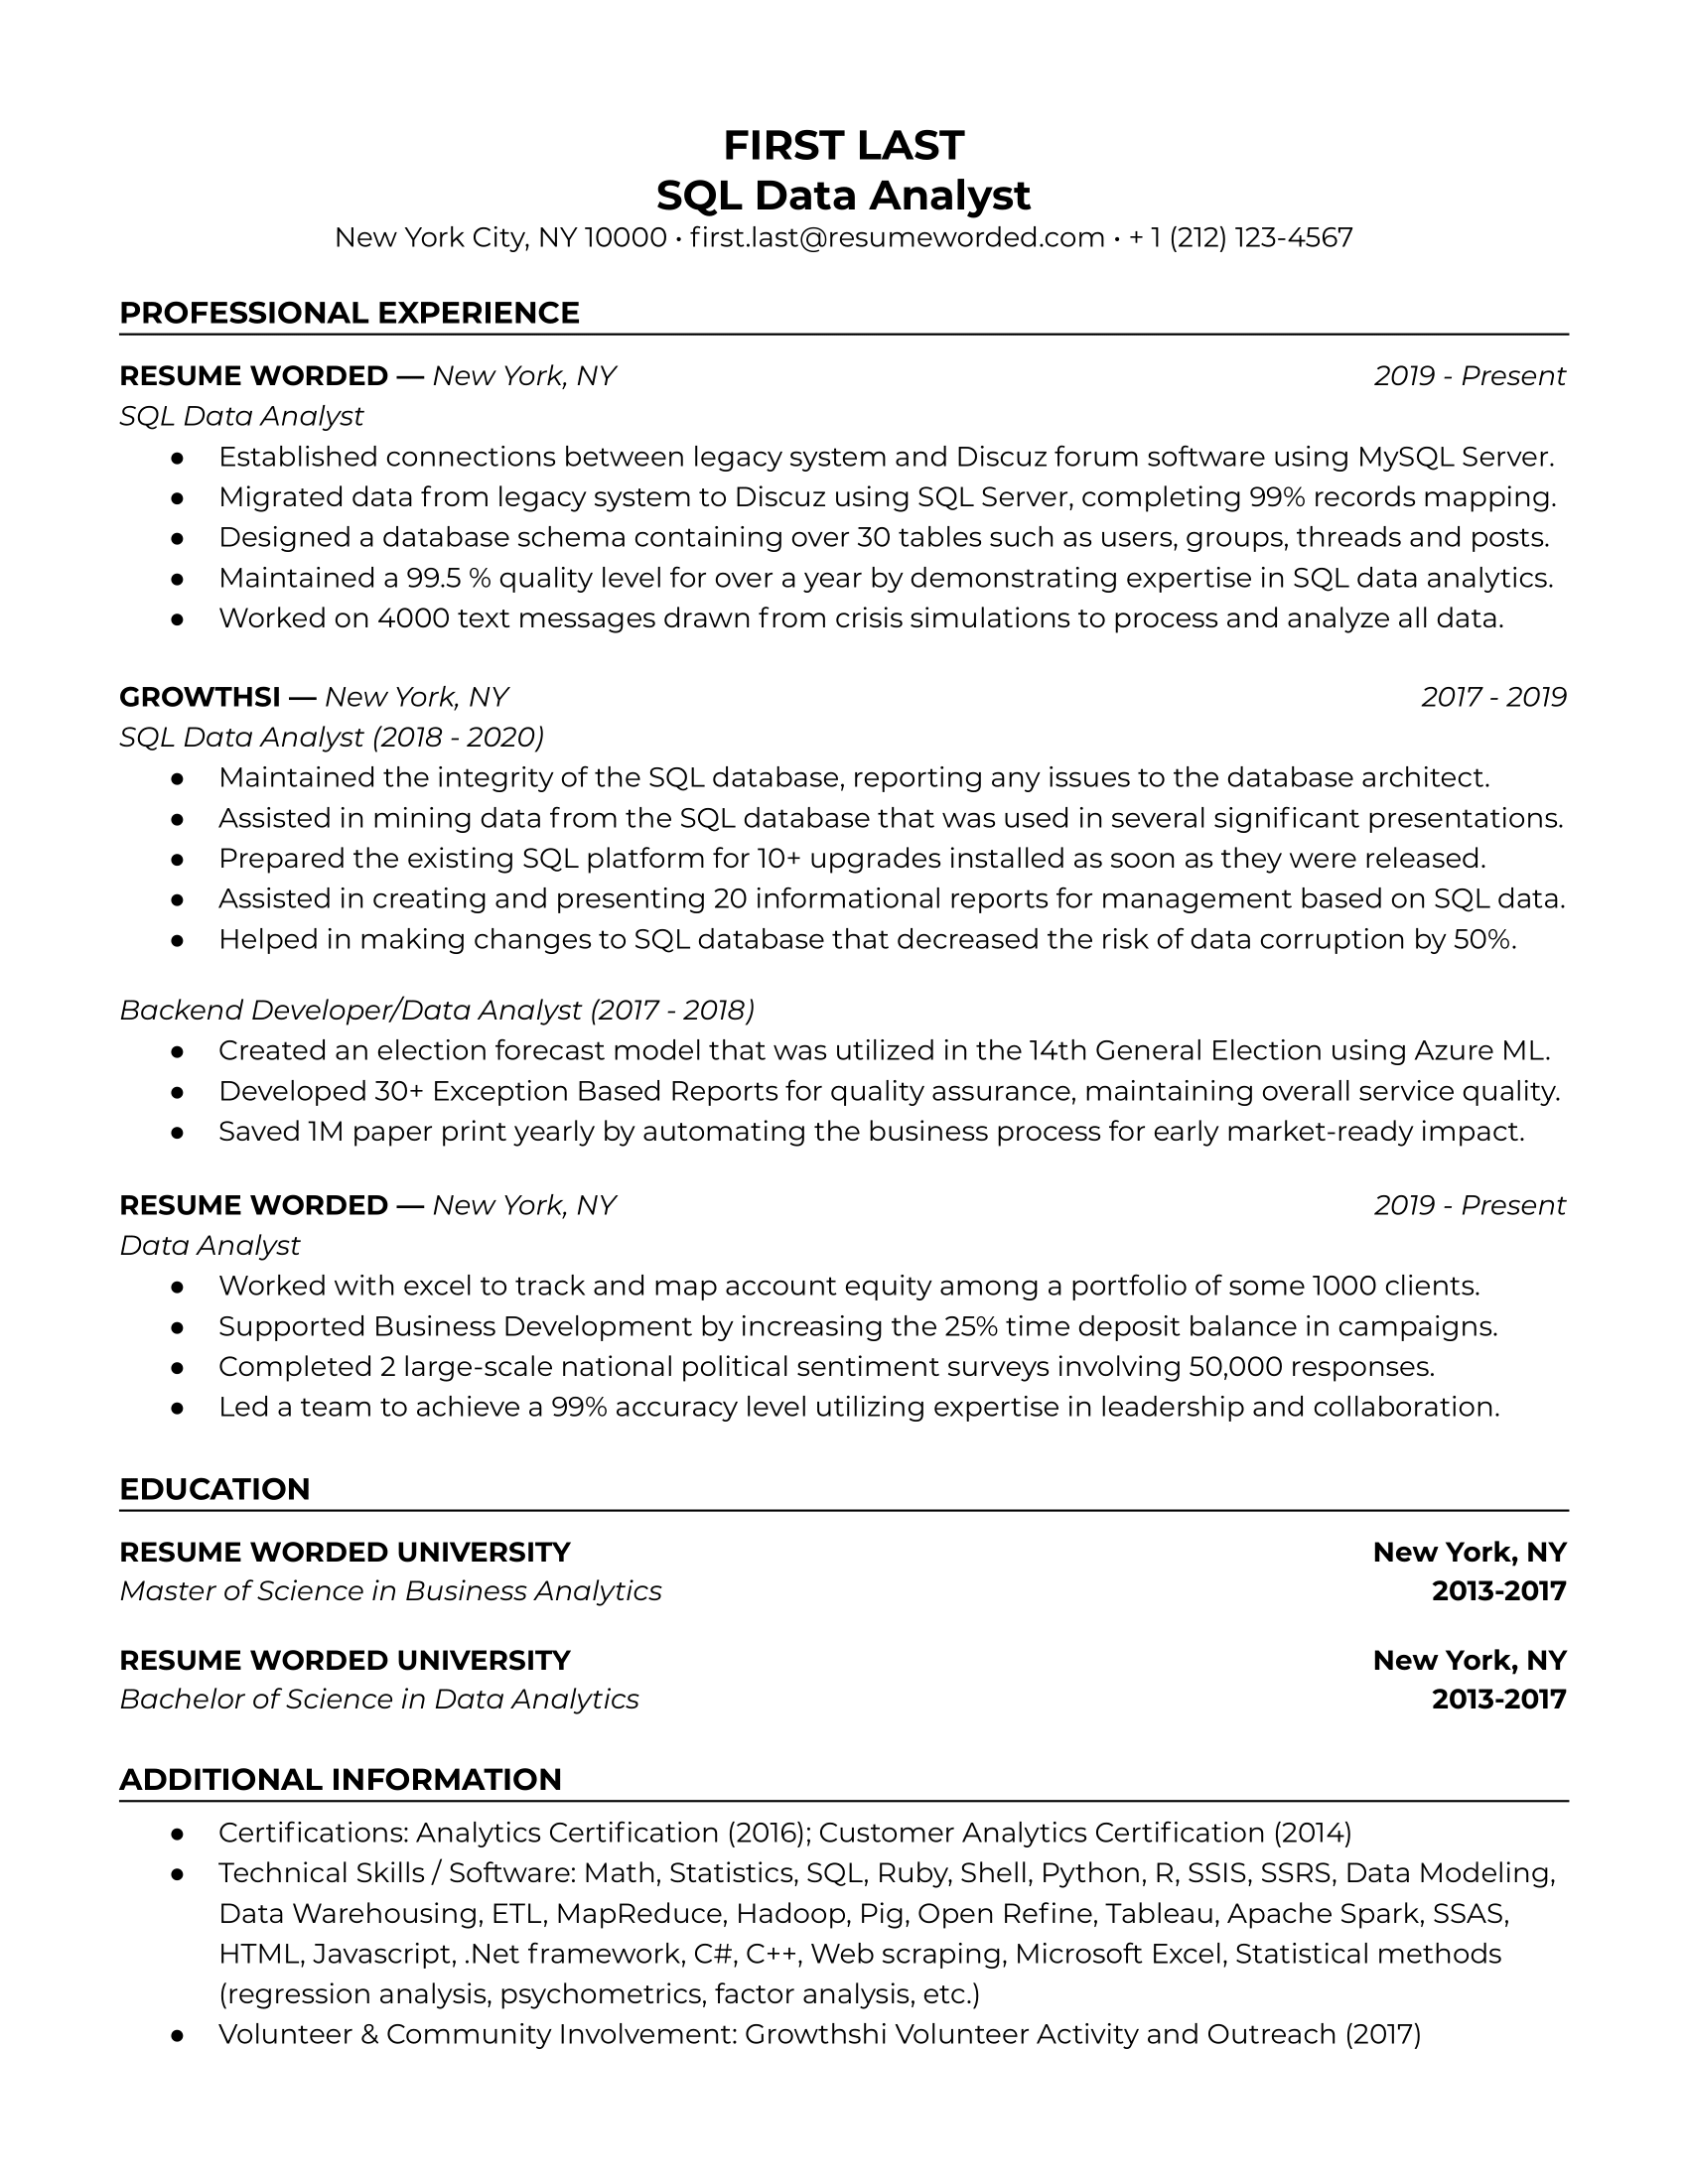 A CV for a SQL Data Analyst showcasing tailored skills and quantified achievements.